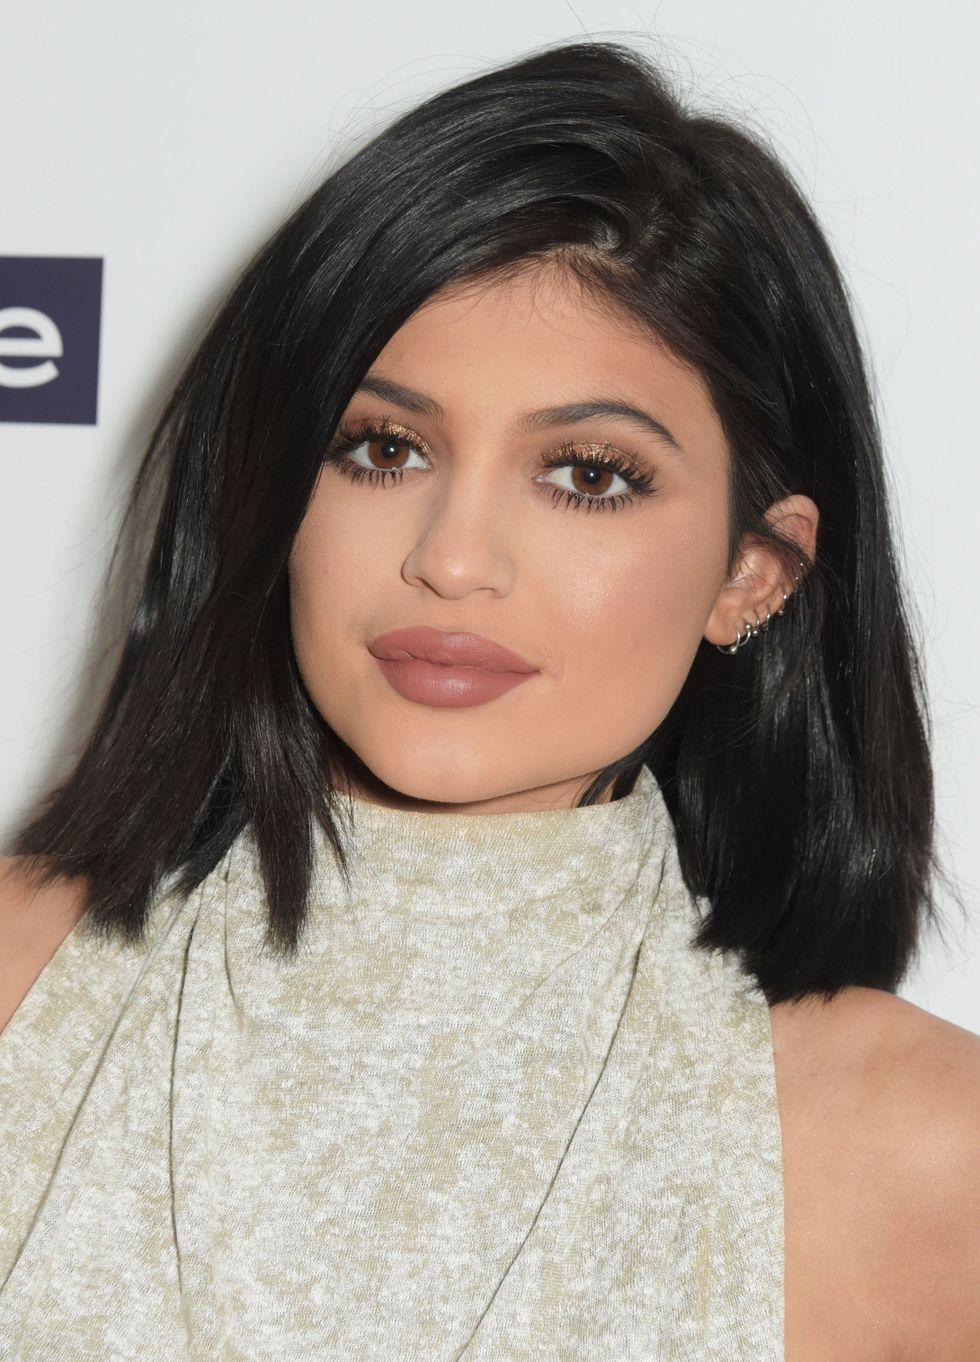 Lip Injections Are Officially the New Botox